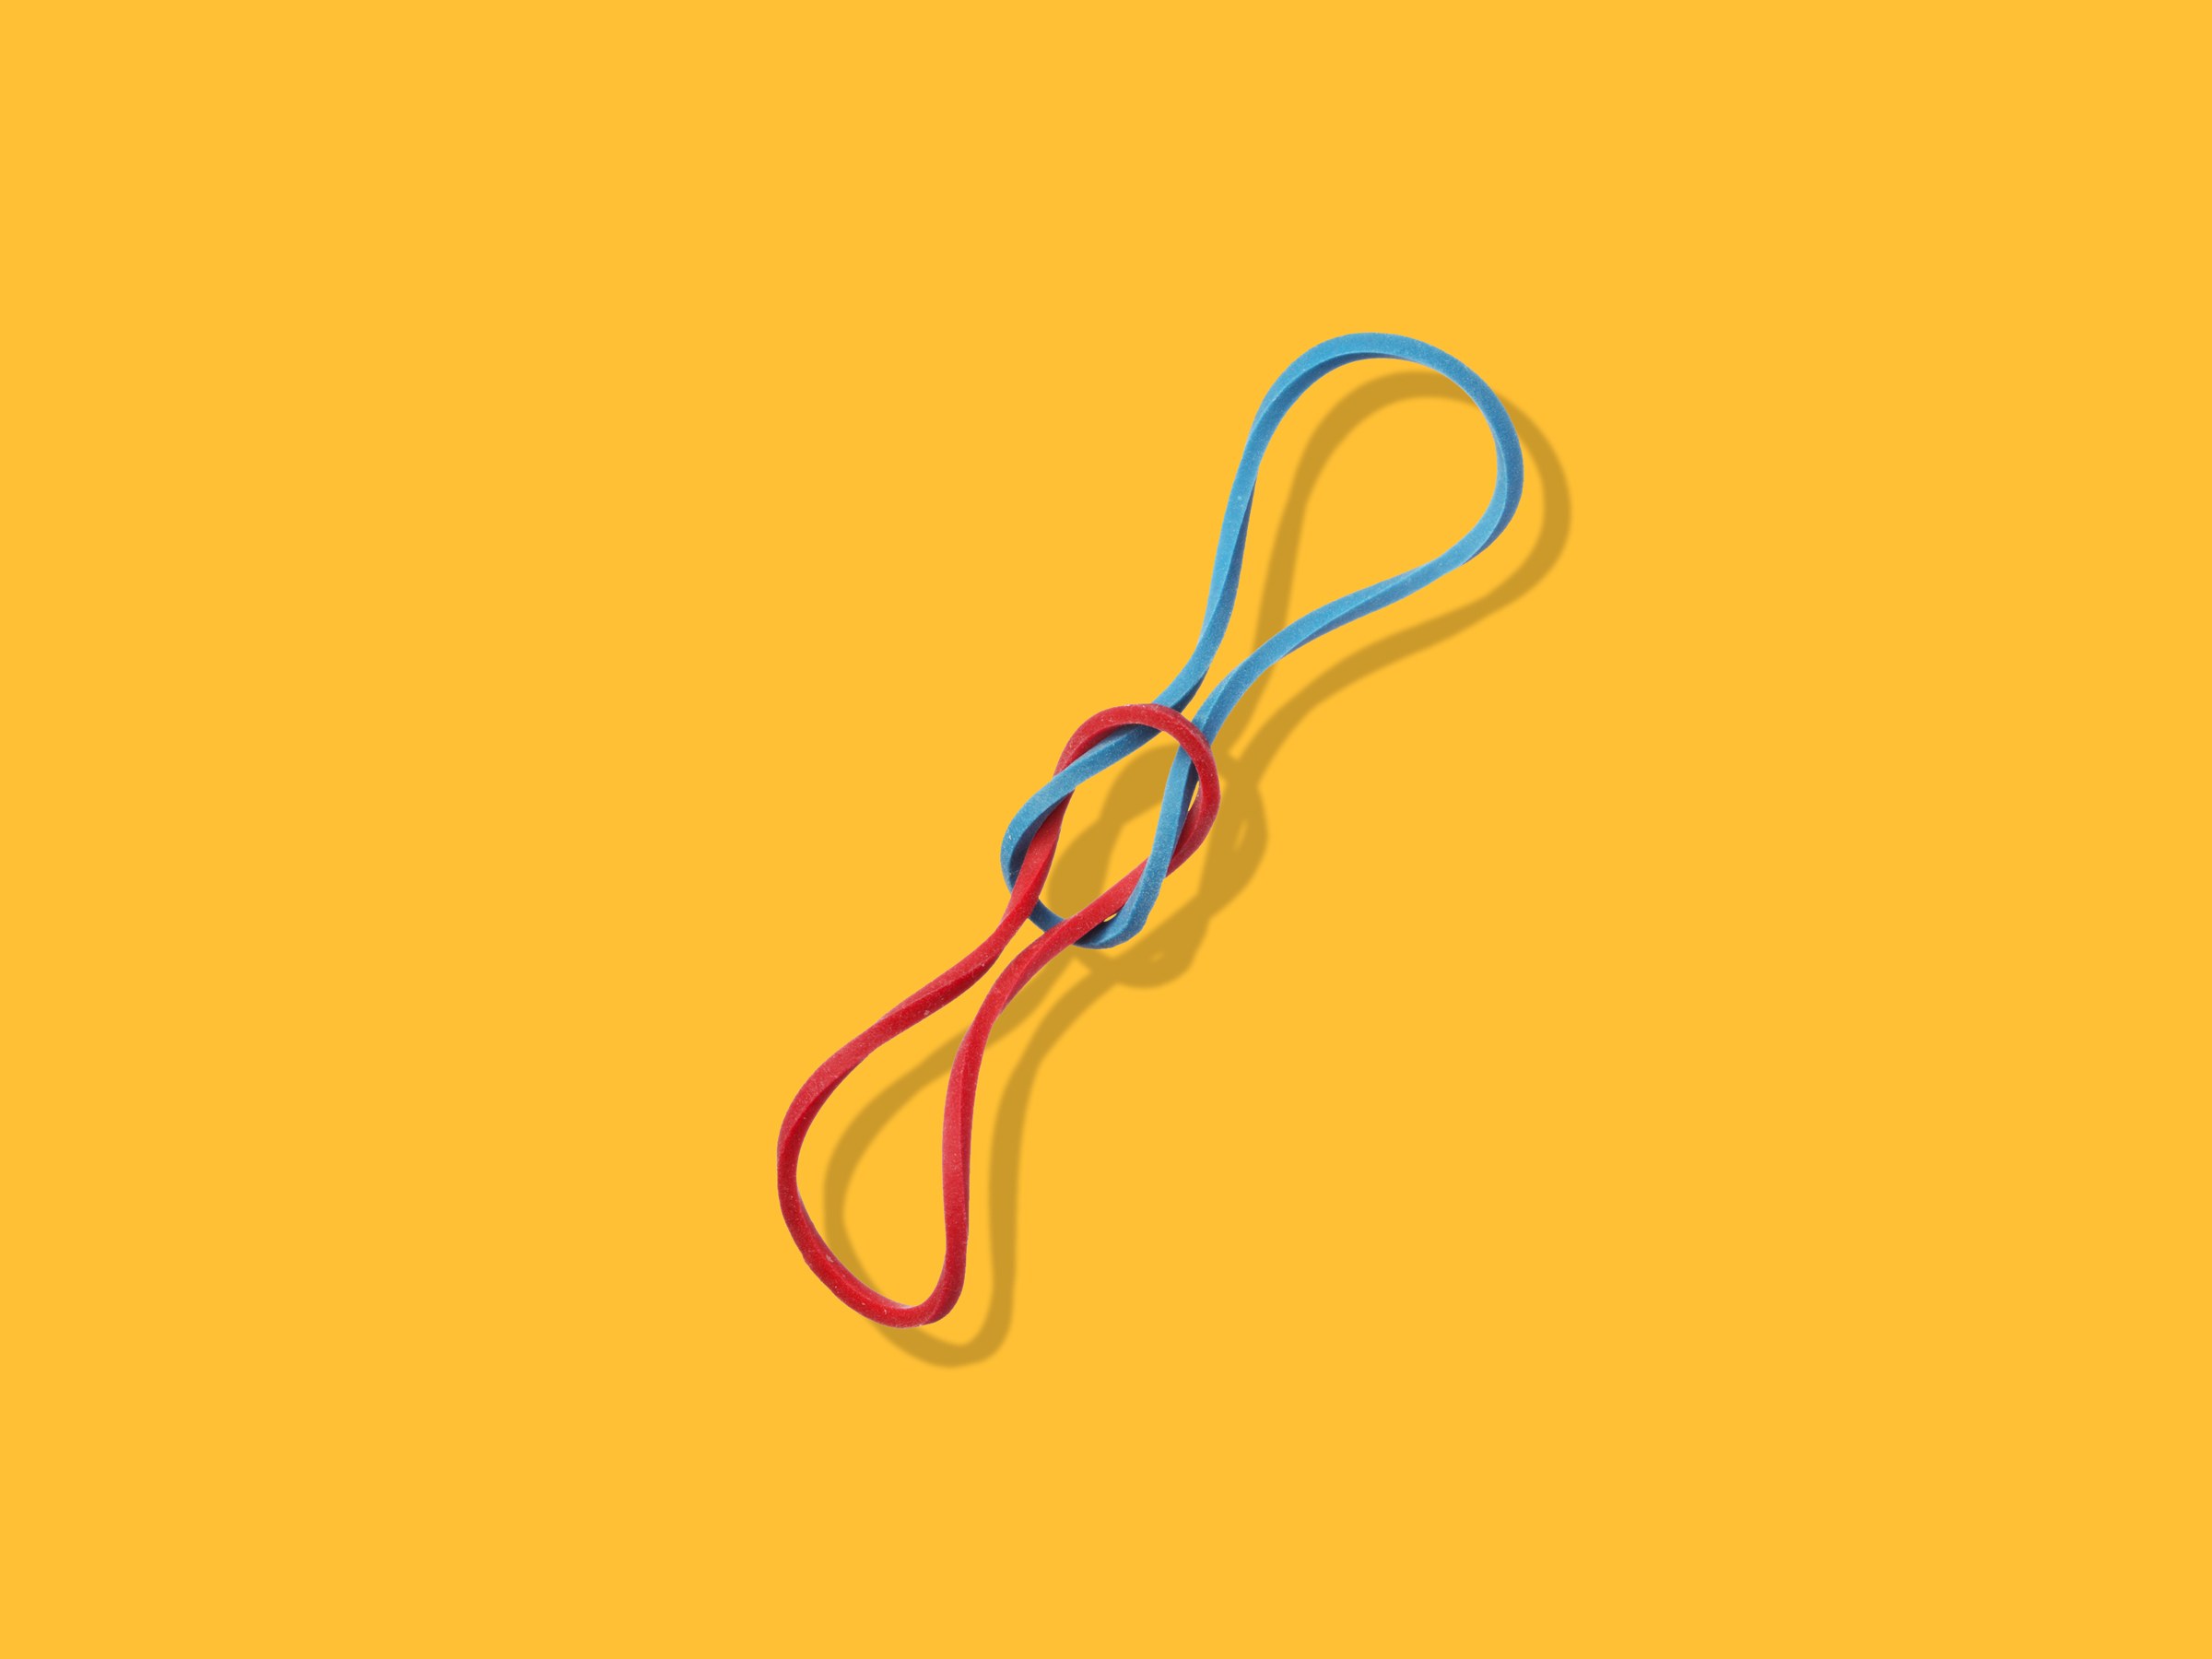 How Much Energy Can You Store in a Rubber Band? | WIRED